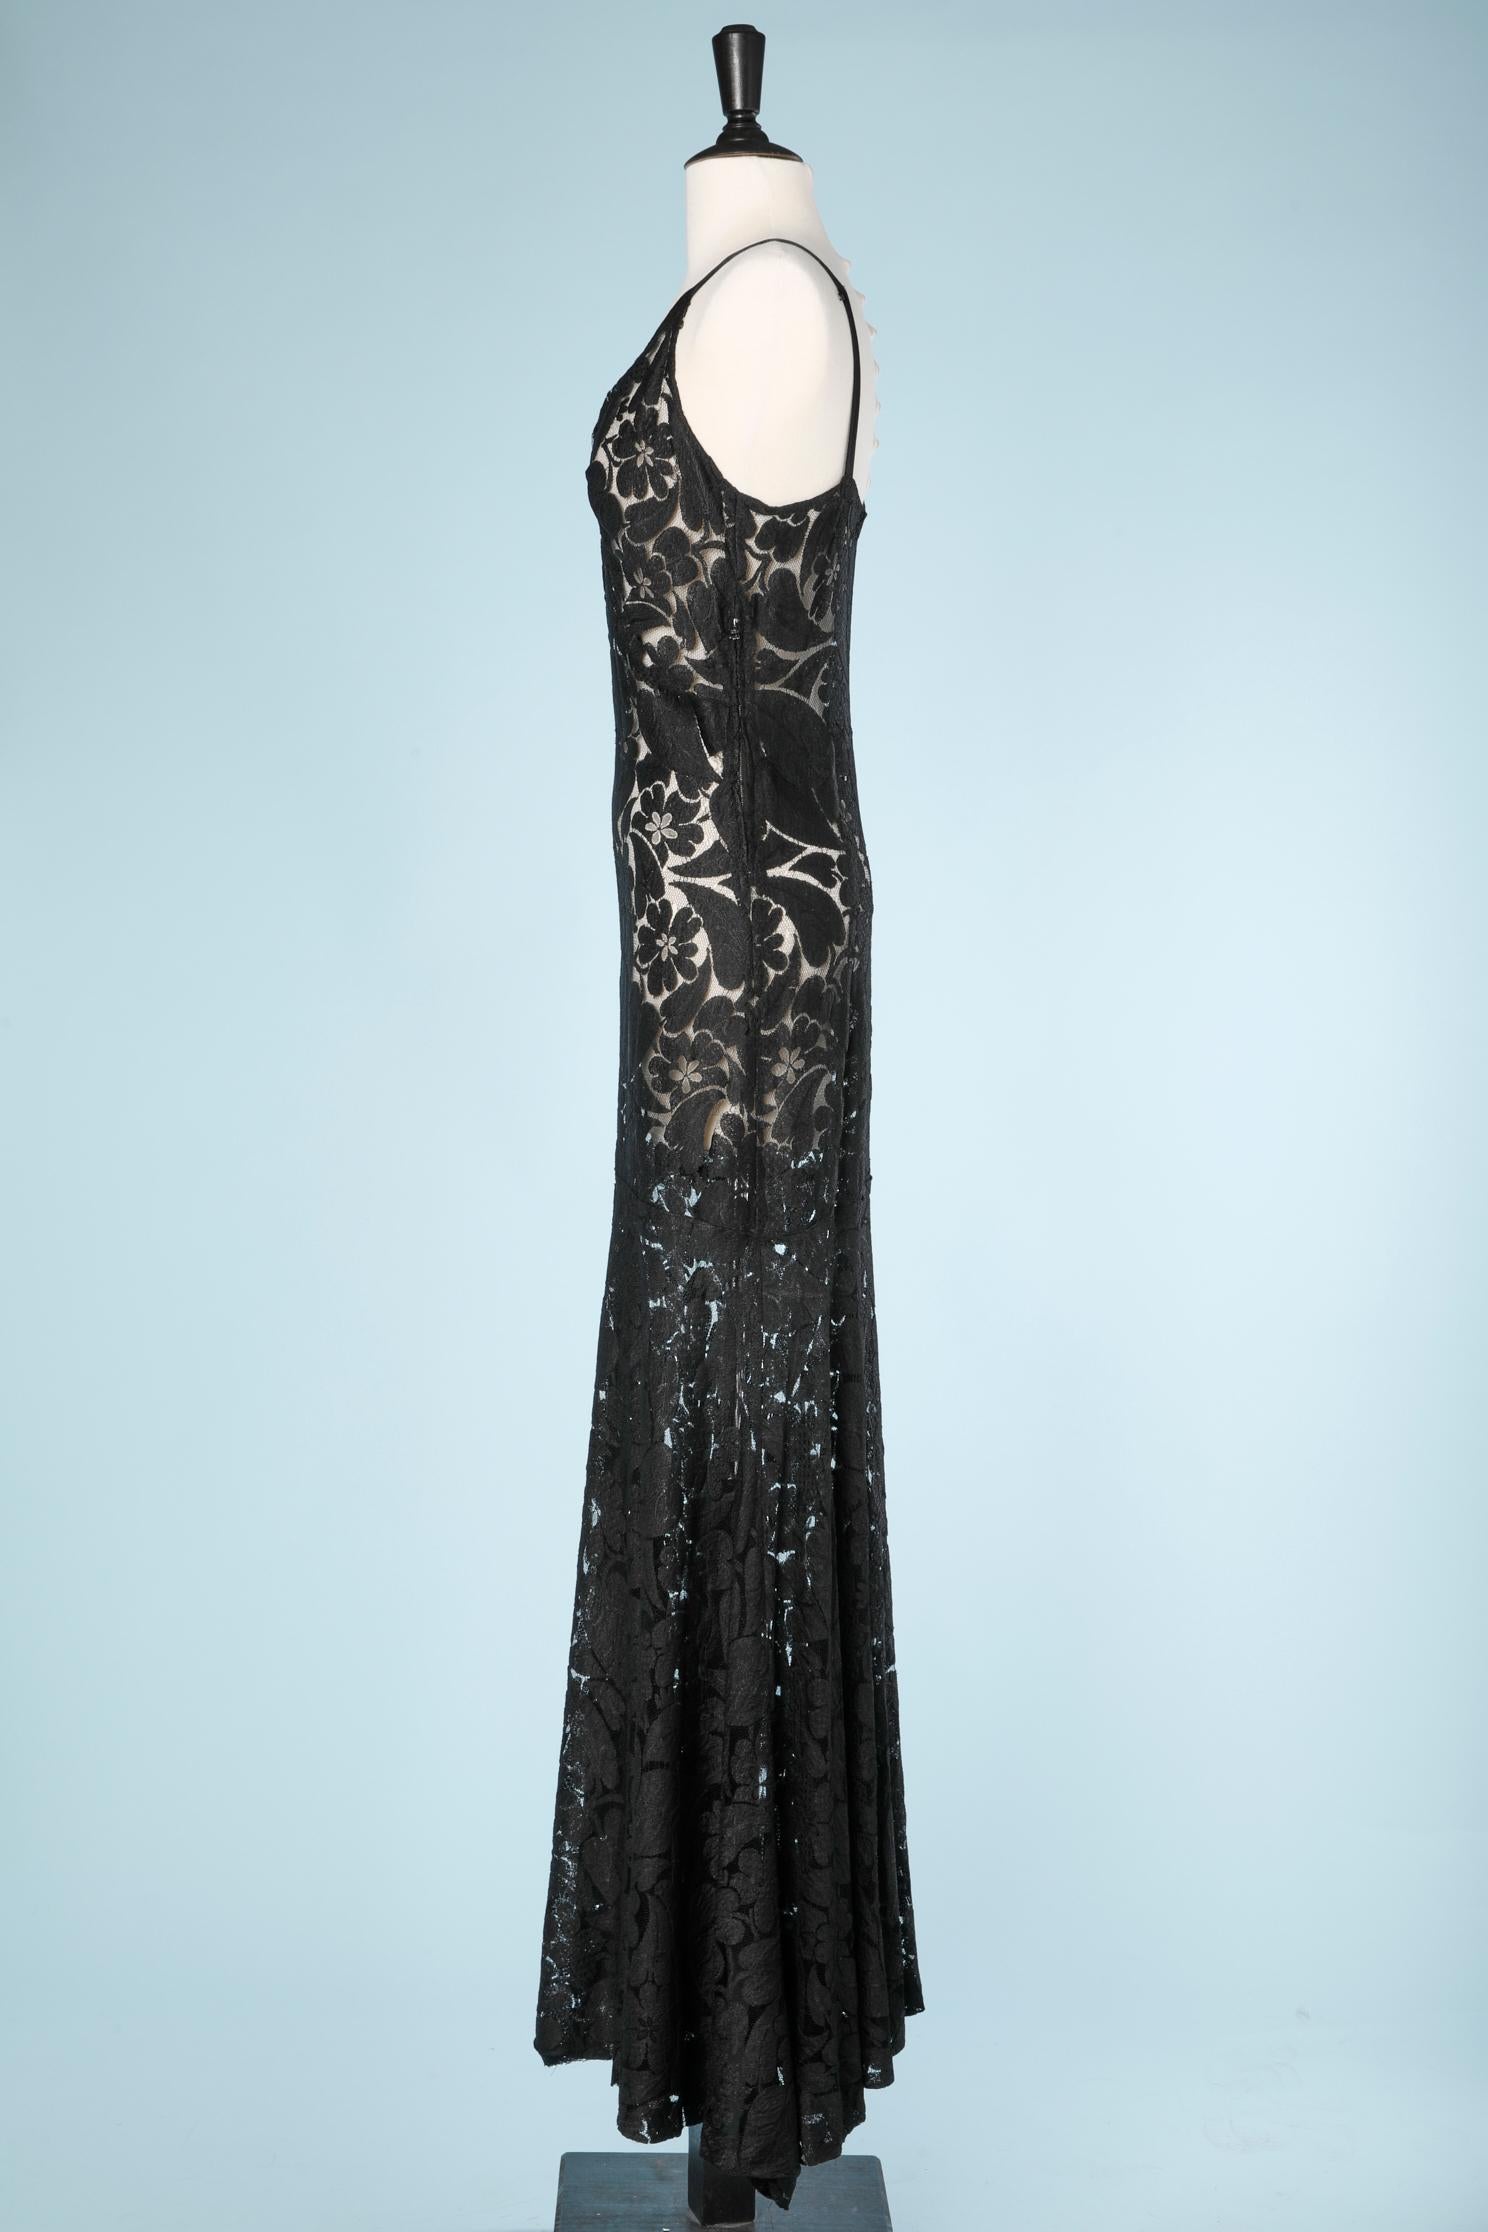 1920 evening gown